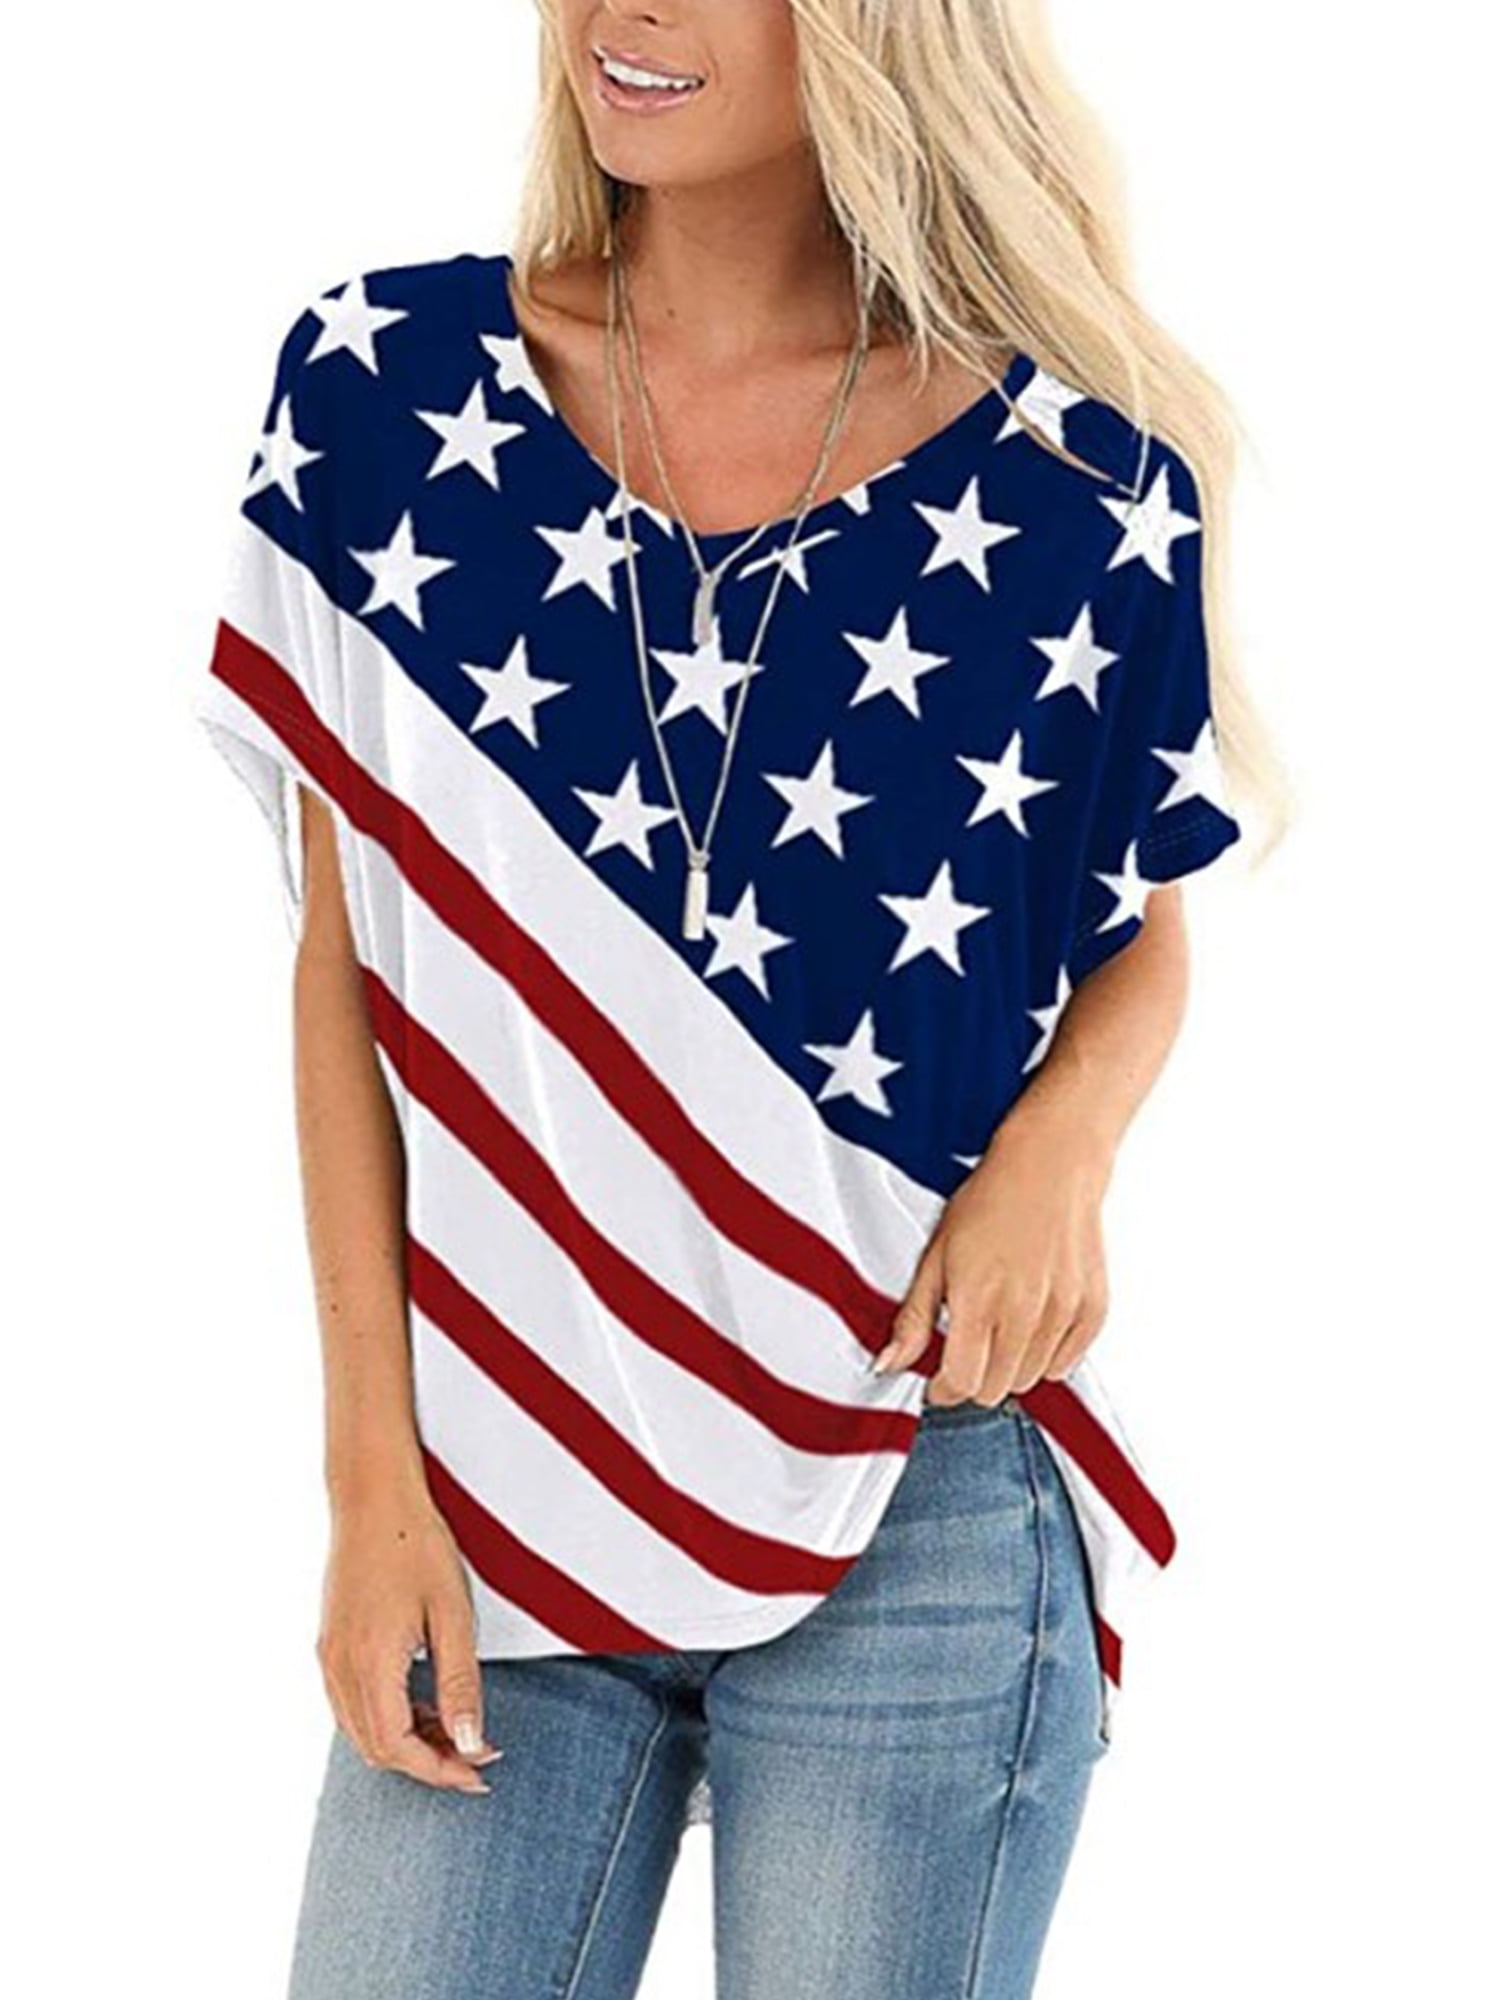 Buolo-Independence Day Womens American Flag T Shirt Short Sleeve Button Down 4th July USA Patriotic Shirt Stars Stripes Print Summer Casual Tee Top Loose Fitting Camisole Vest Cami Blouses